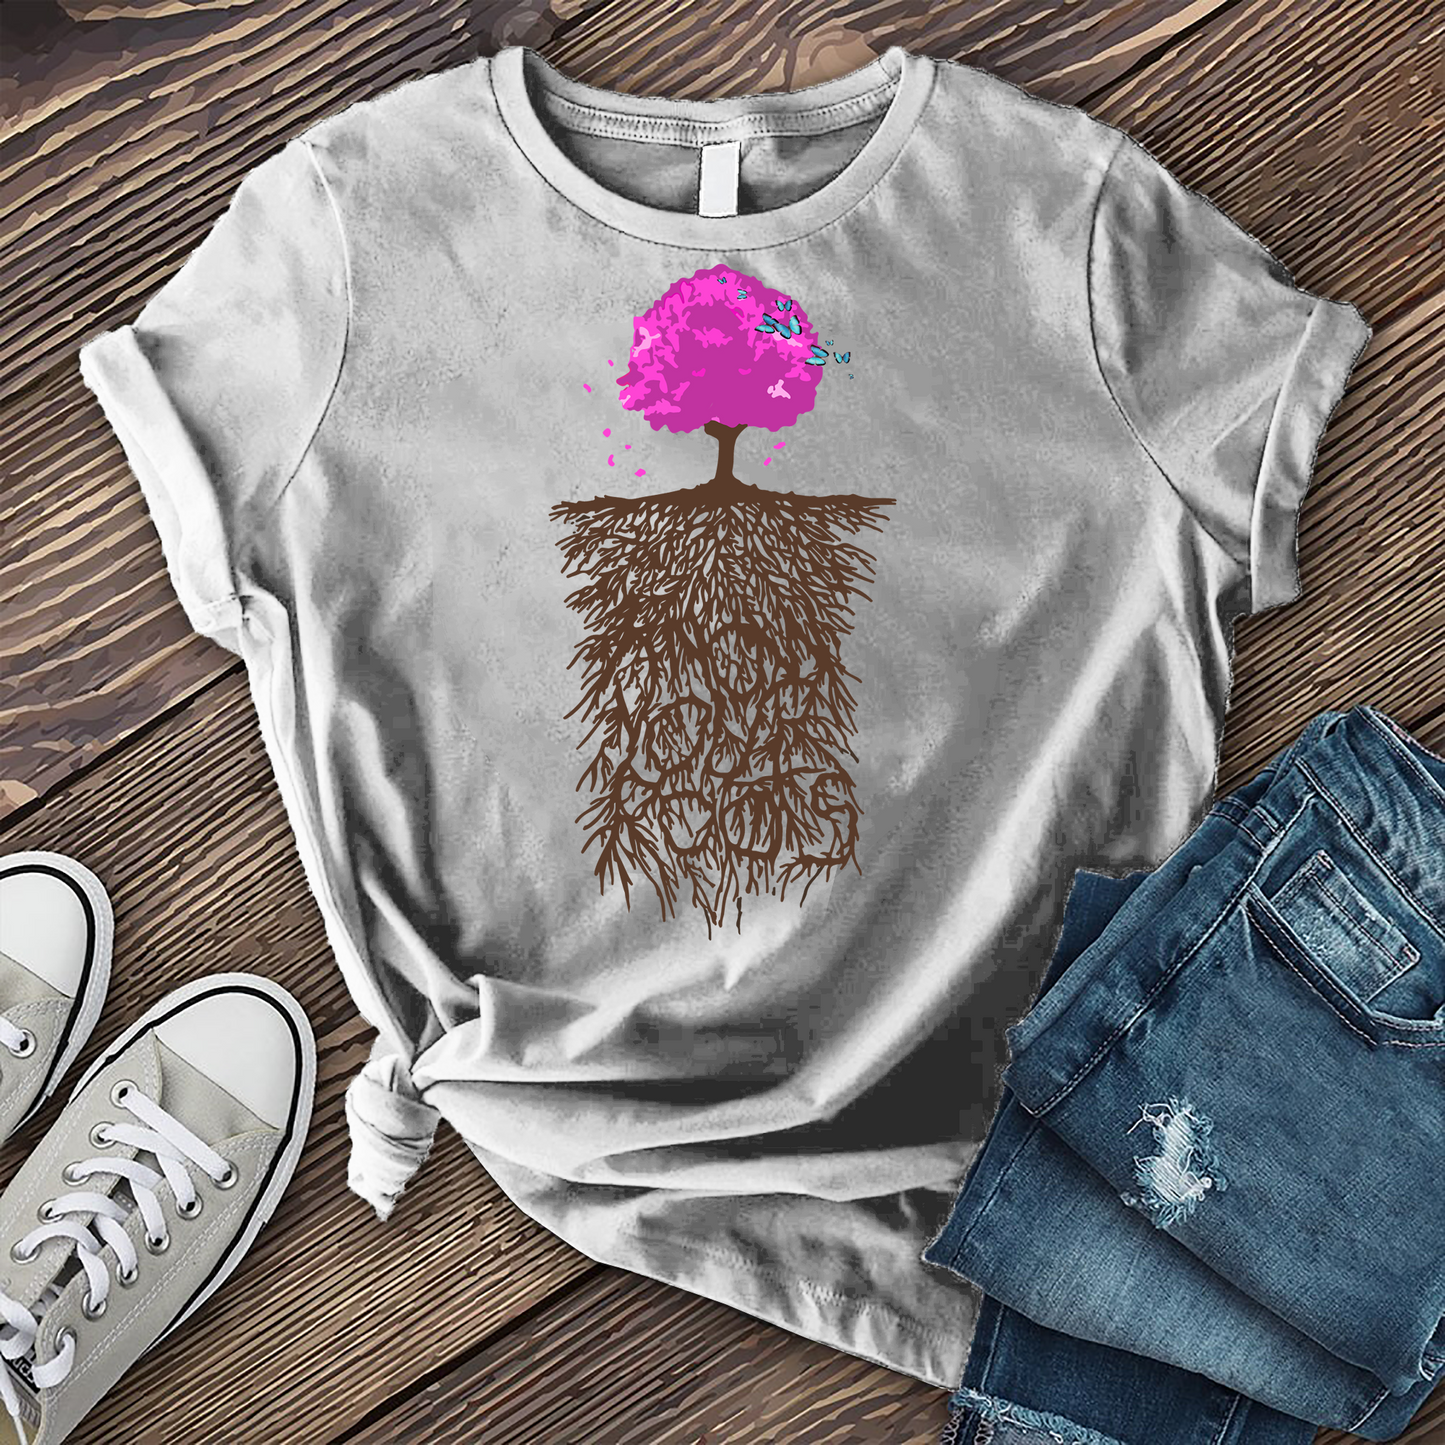 Cherry Blossom Butterfly Tree T-shirt